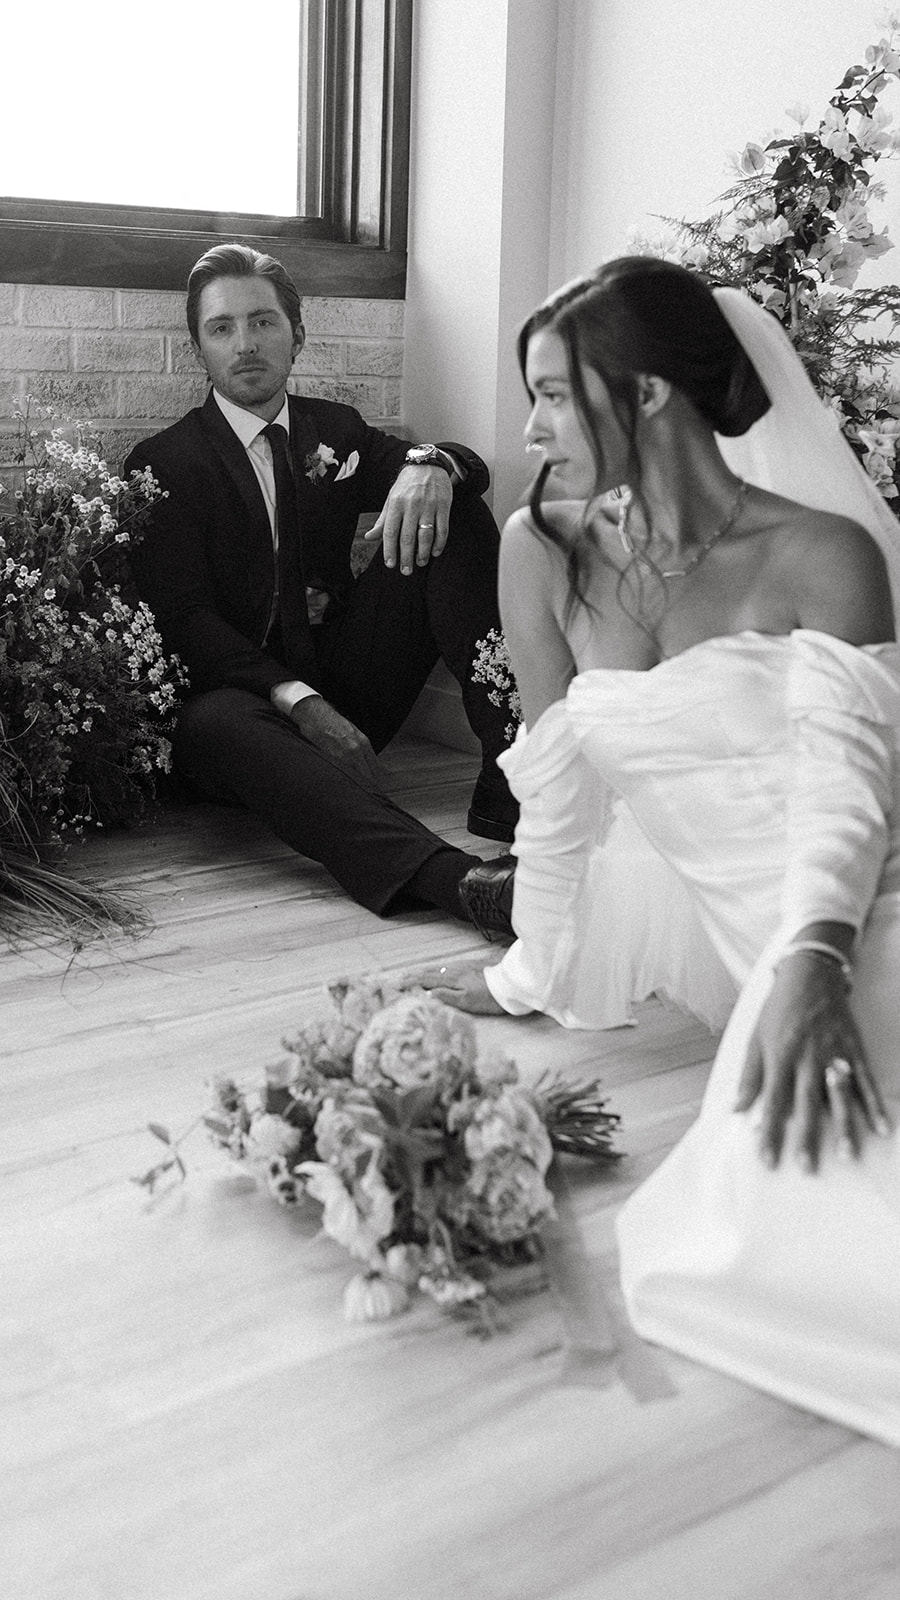 A groom in a designer suit sits on a wood floor with a bride who is wearing an off-the-shoulder wedding dress.  